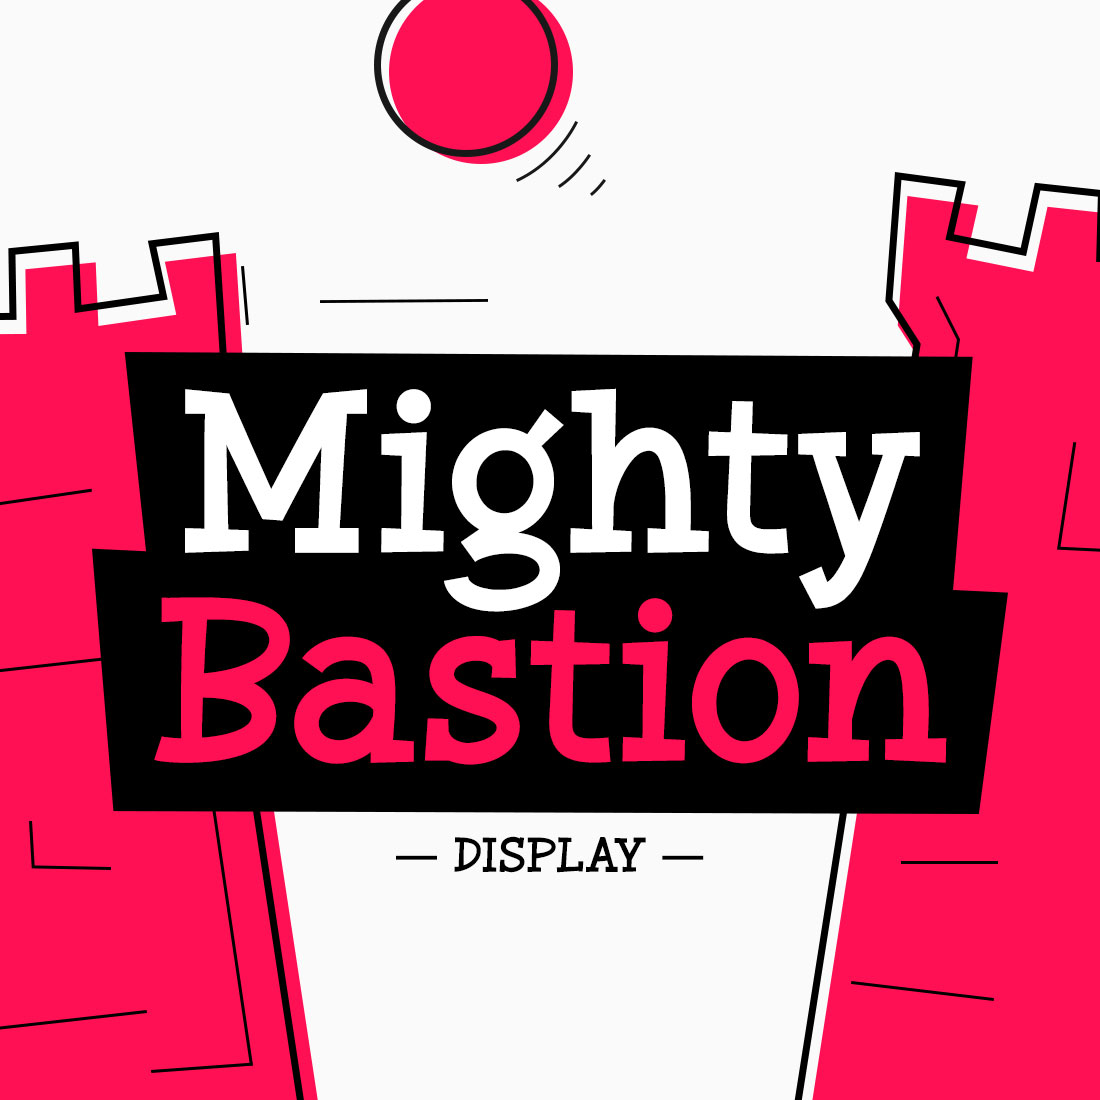 Mighty Bastion - Display Font cover image.